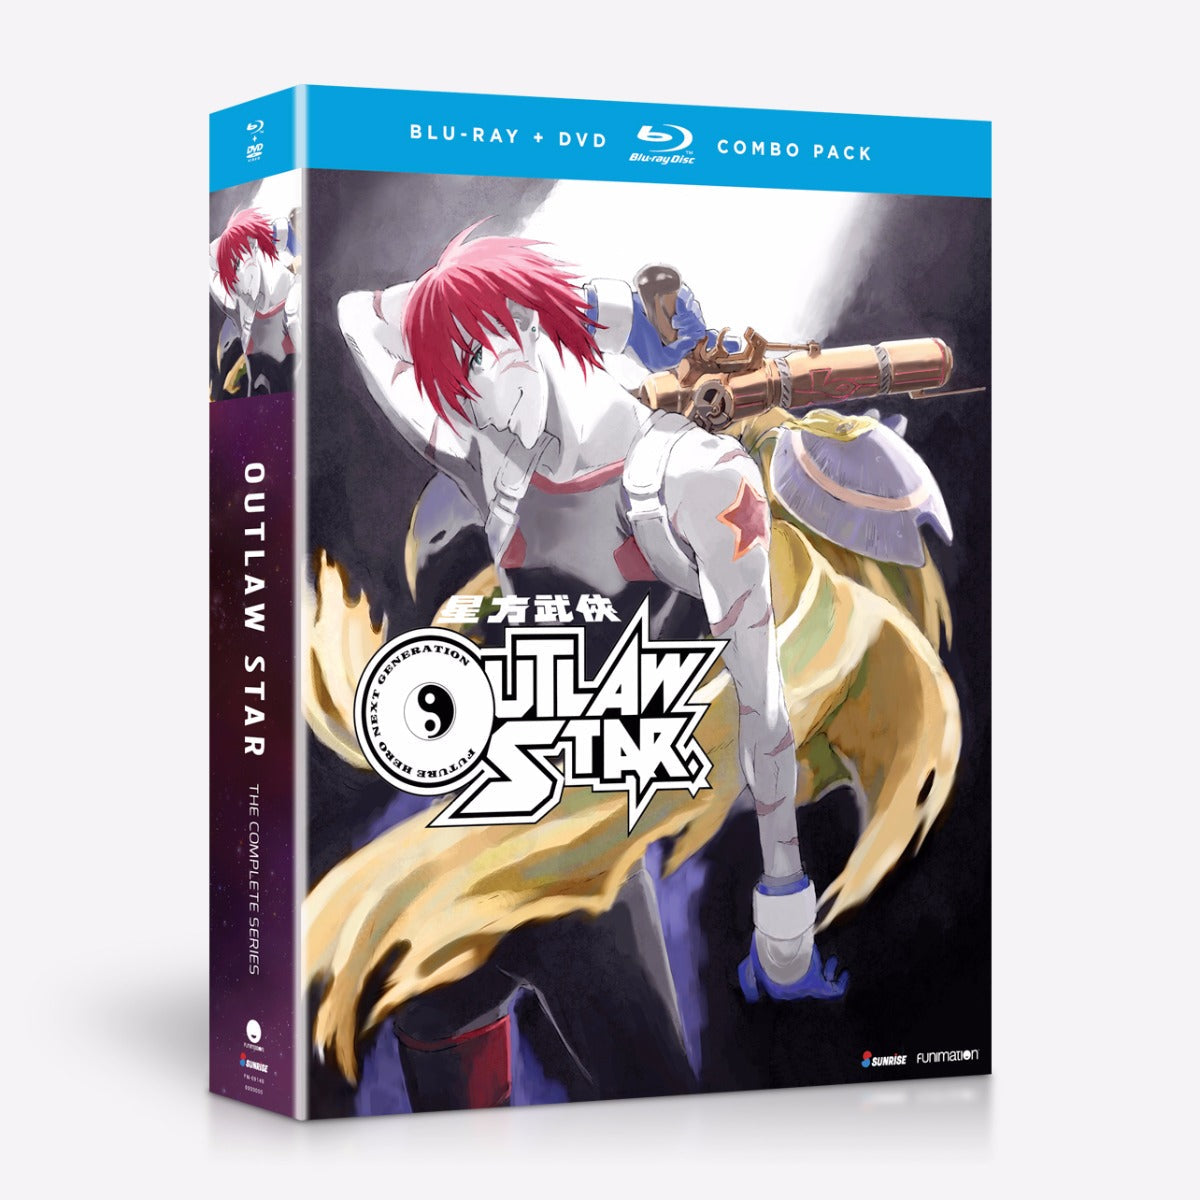 Outlaw Star - The Complete Series - Blu-ray + DVD image count 0